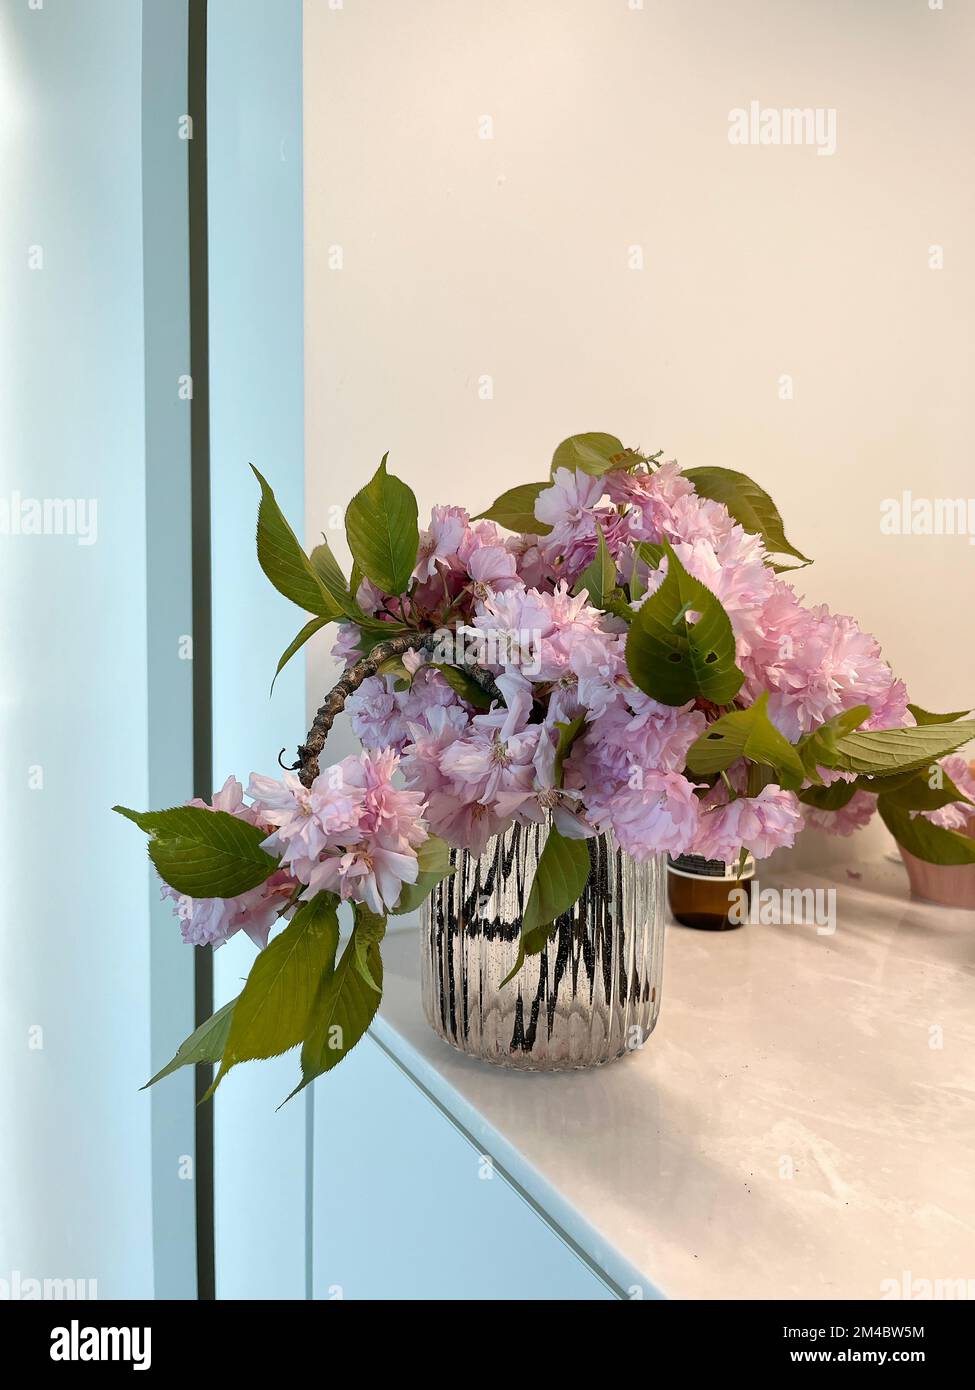 Double cherry blossoms in the glass vase Stock Photo